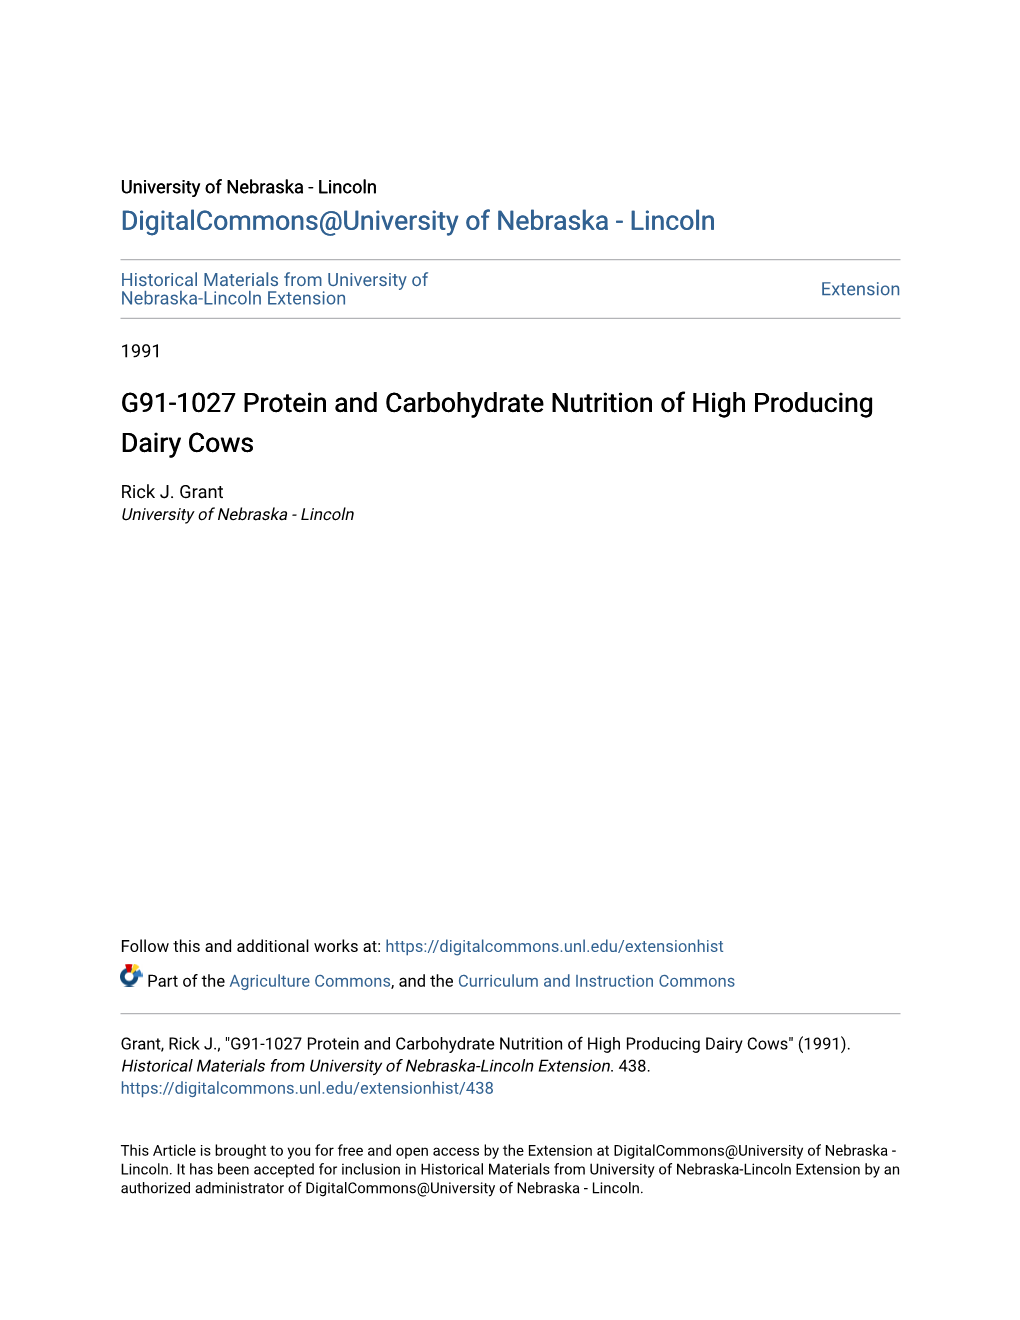 G91-1027 Protein and Carbohydrate Nutrition of High Producing Dairy Cows